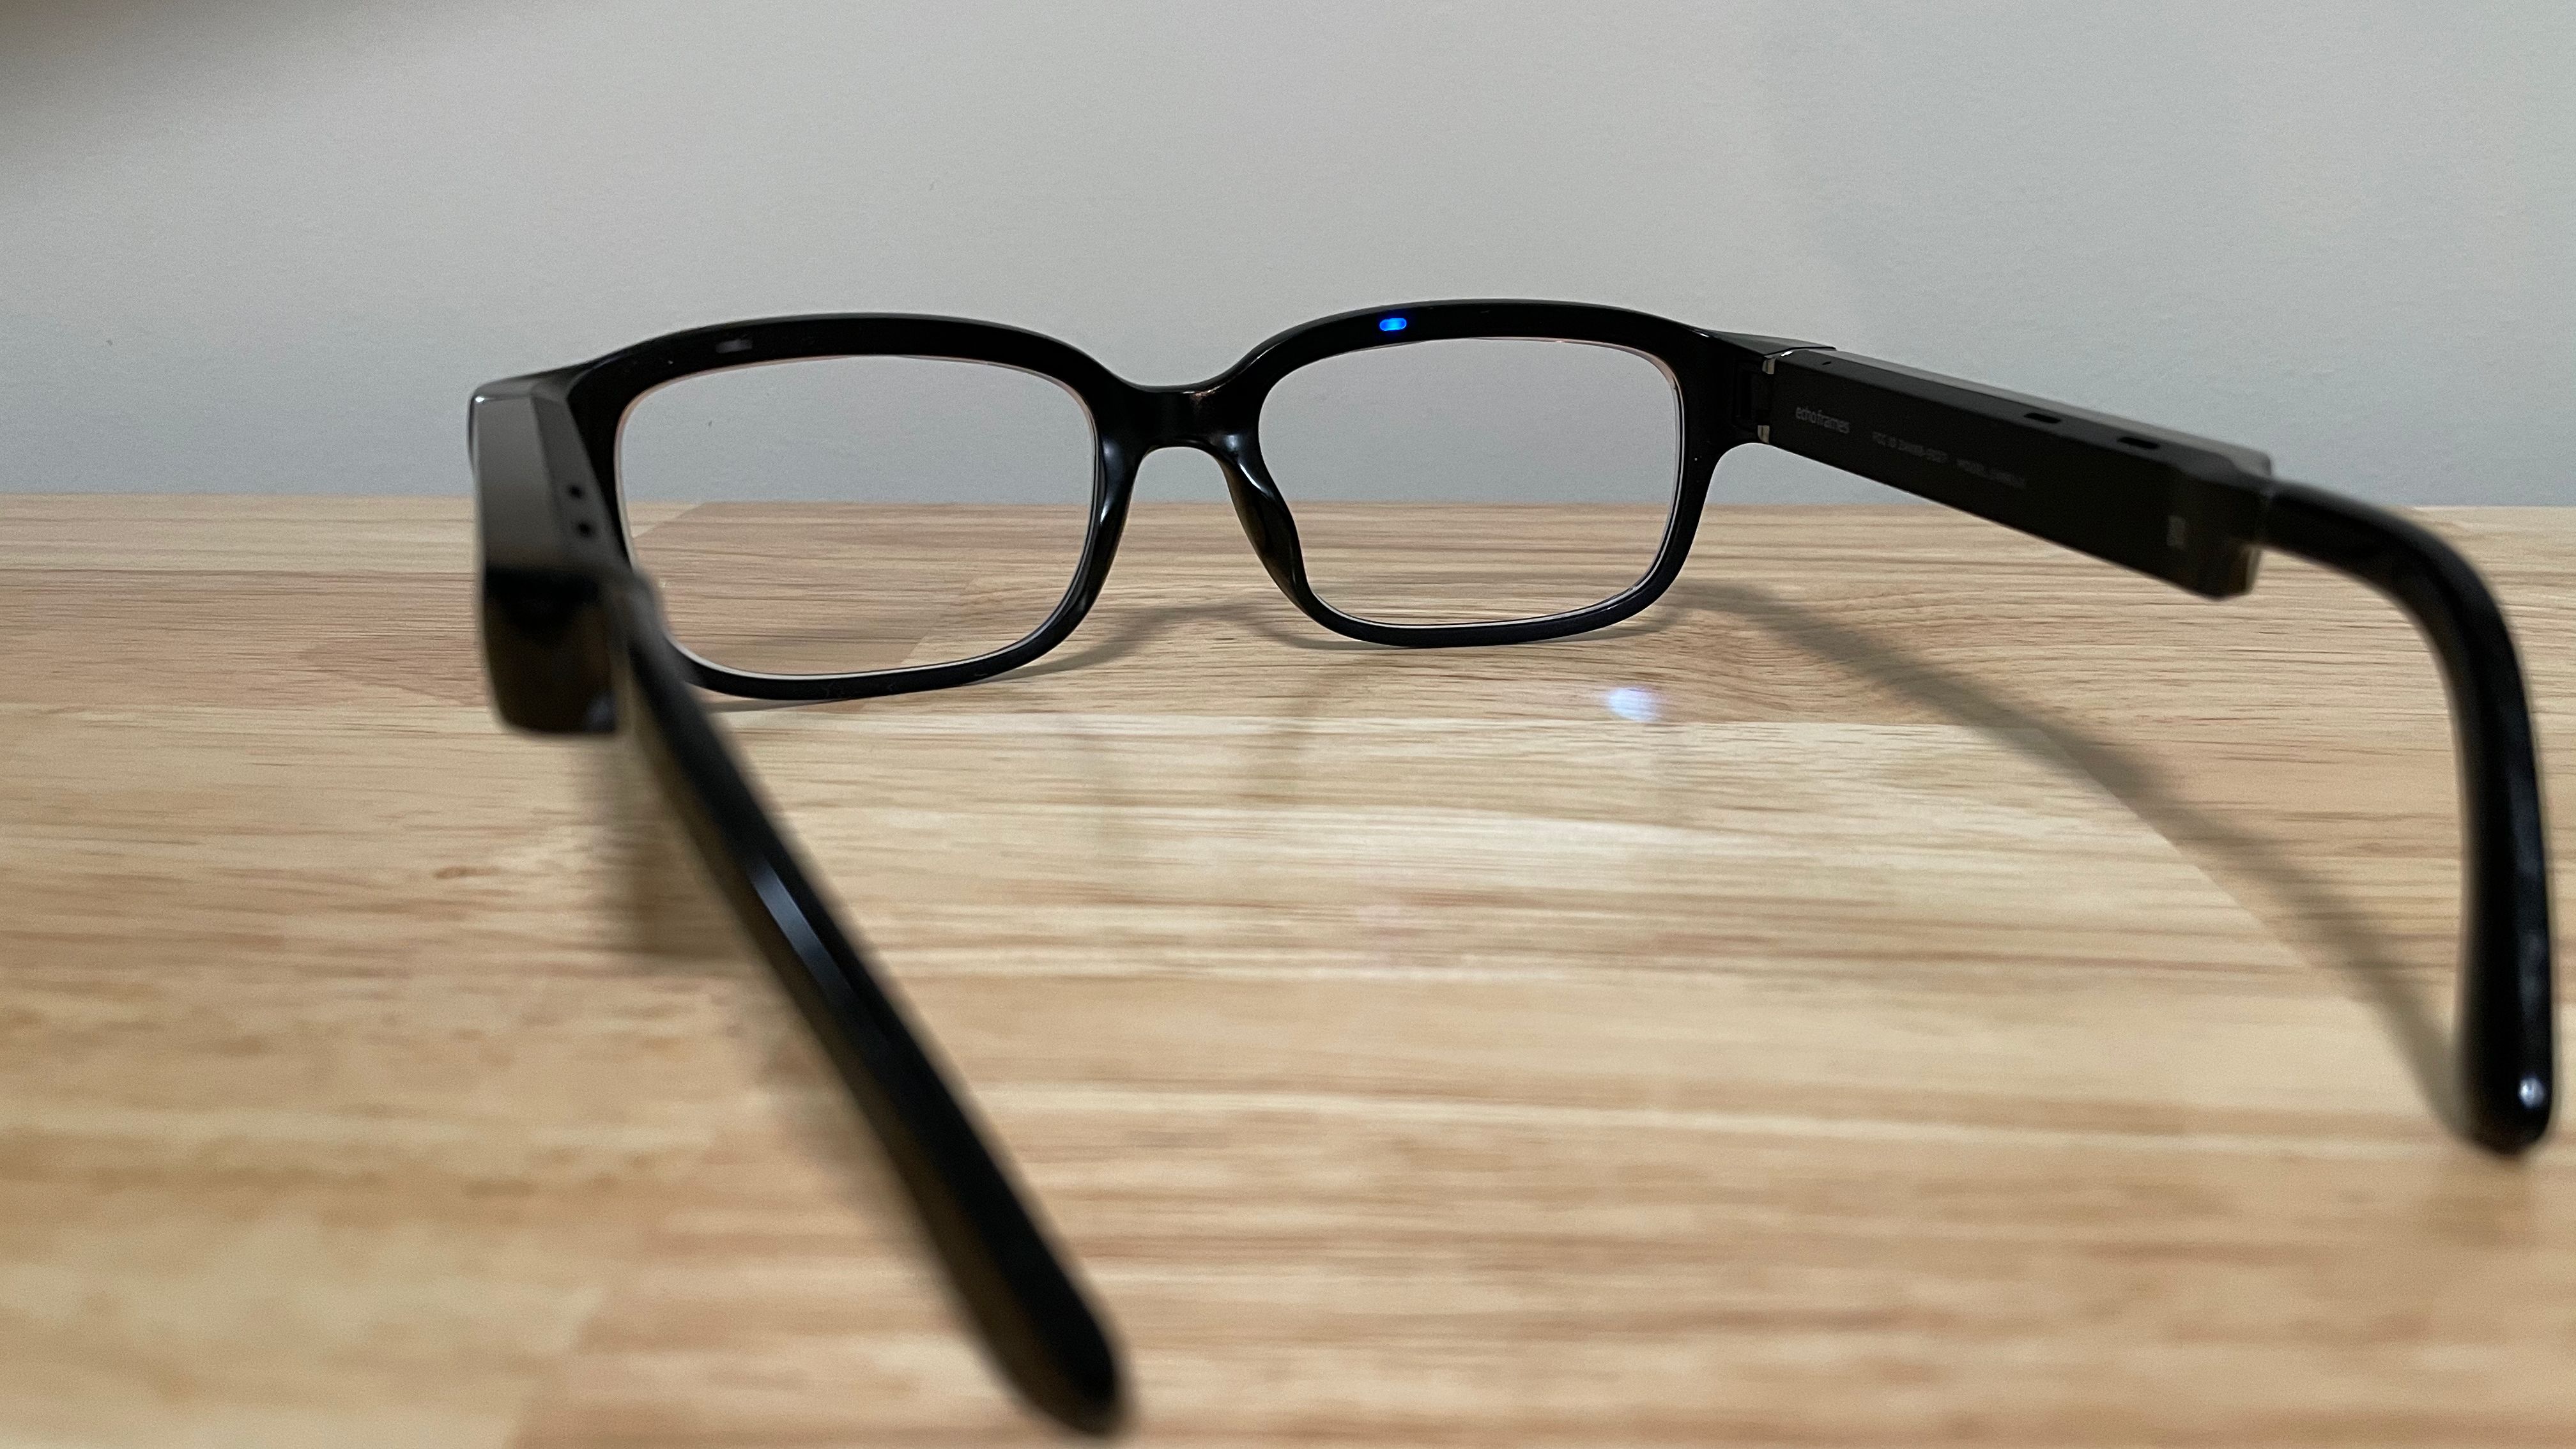 s New Echo Frames Glasses Have Better Audio and Battery Life - CNET